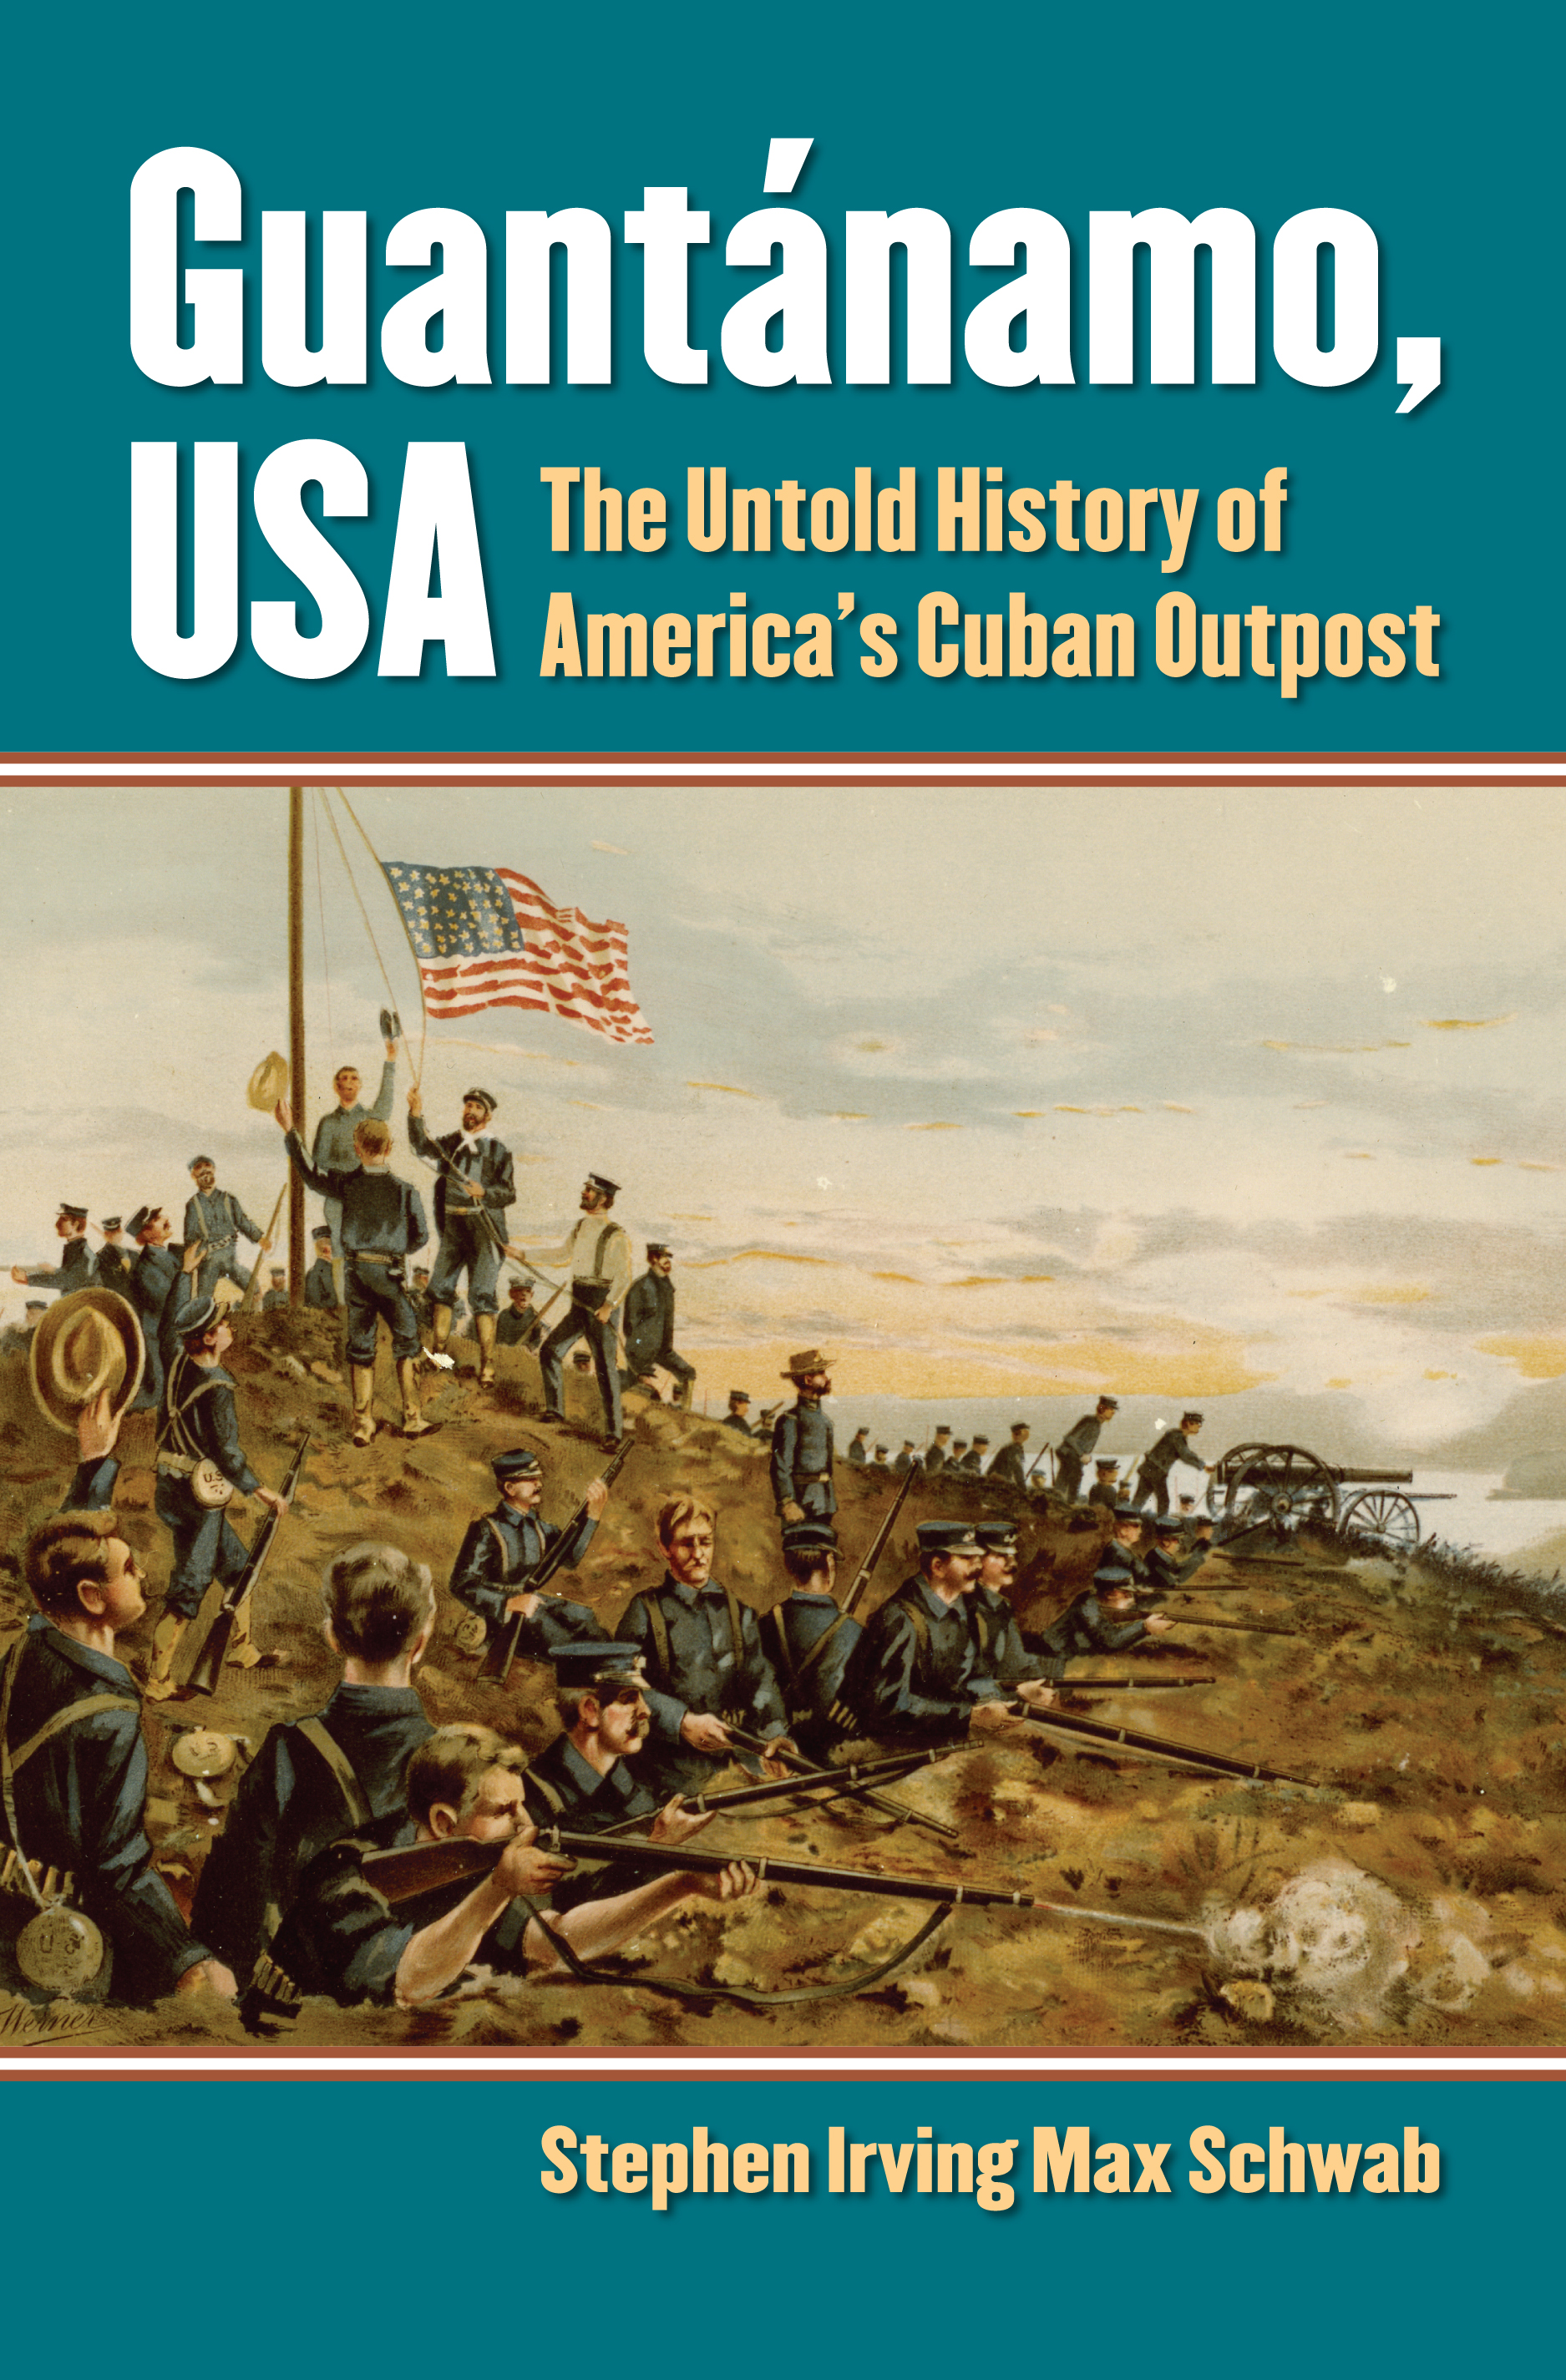 Cover of Guantánamo, USA The Untold History of America's Cuban Outpost by Stephen Irving Max Schwab